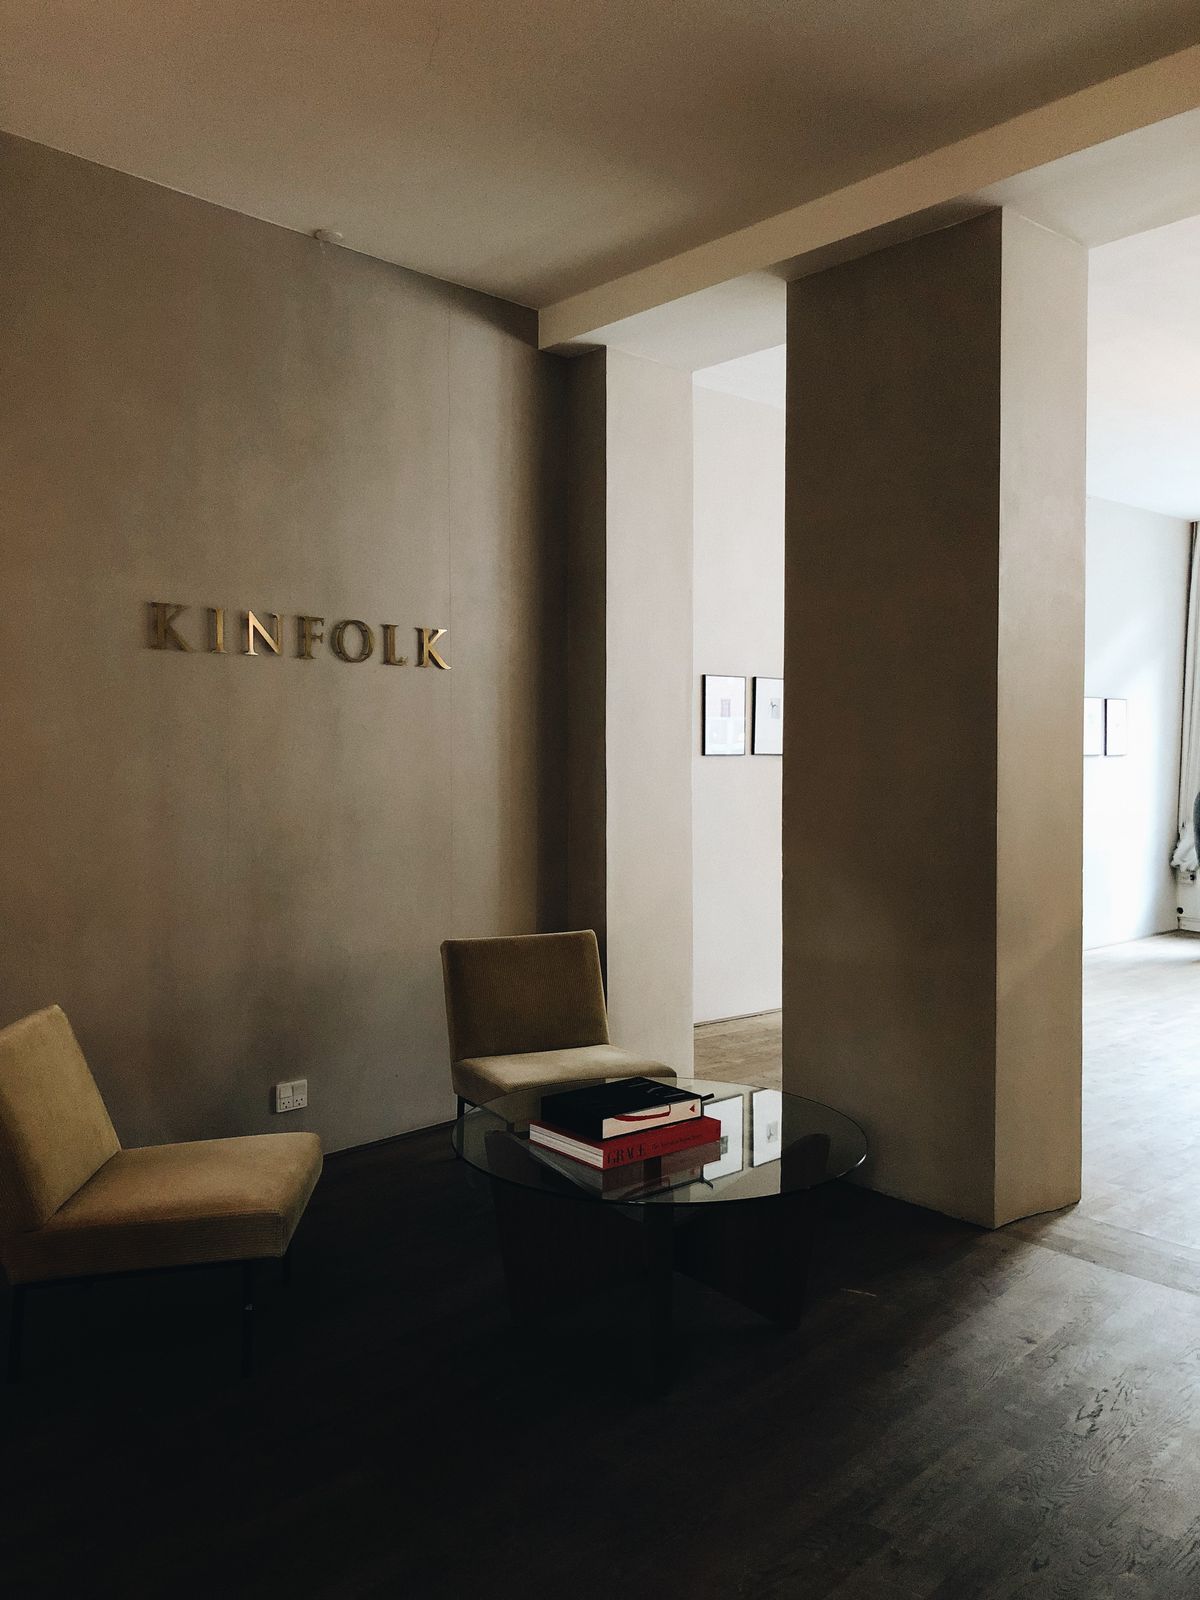 We Went To The Kinfolk Gallery